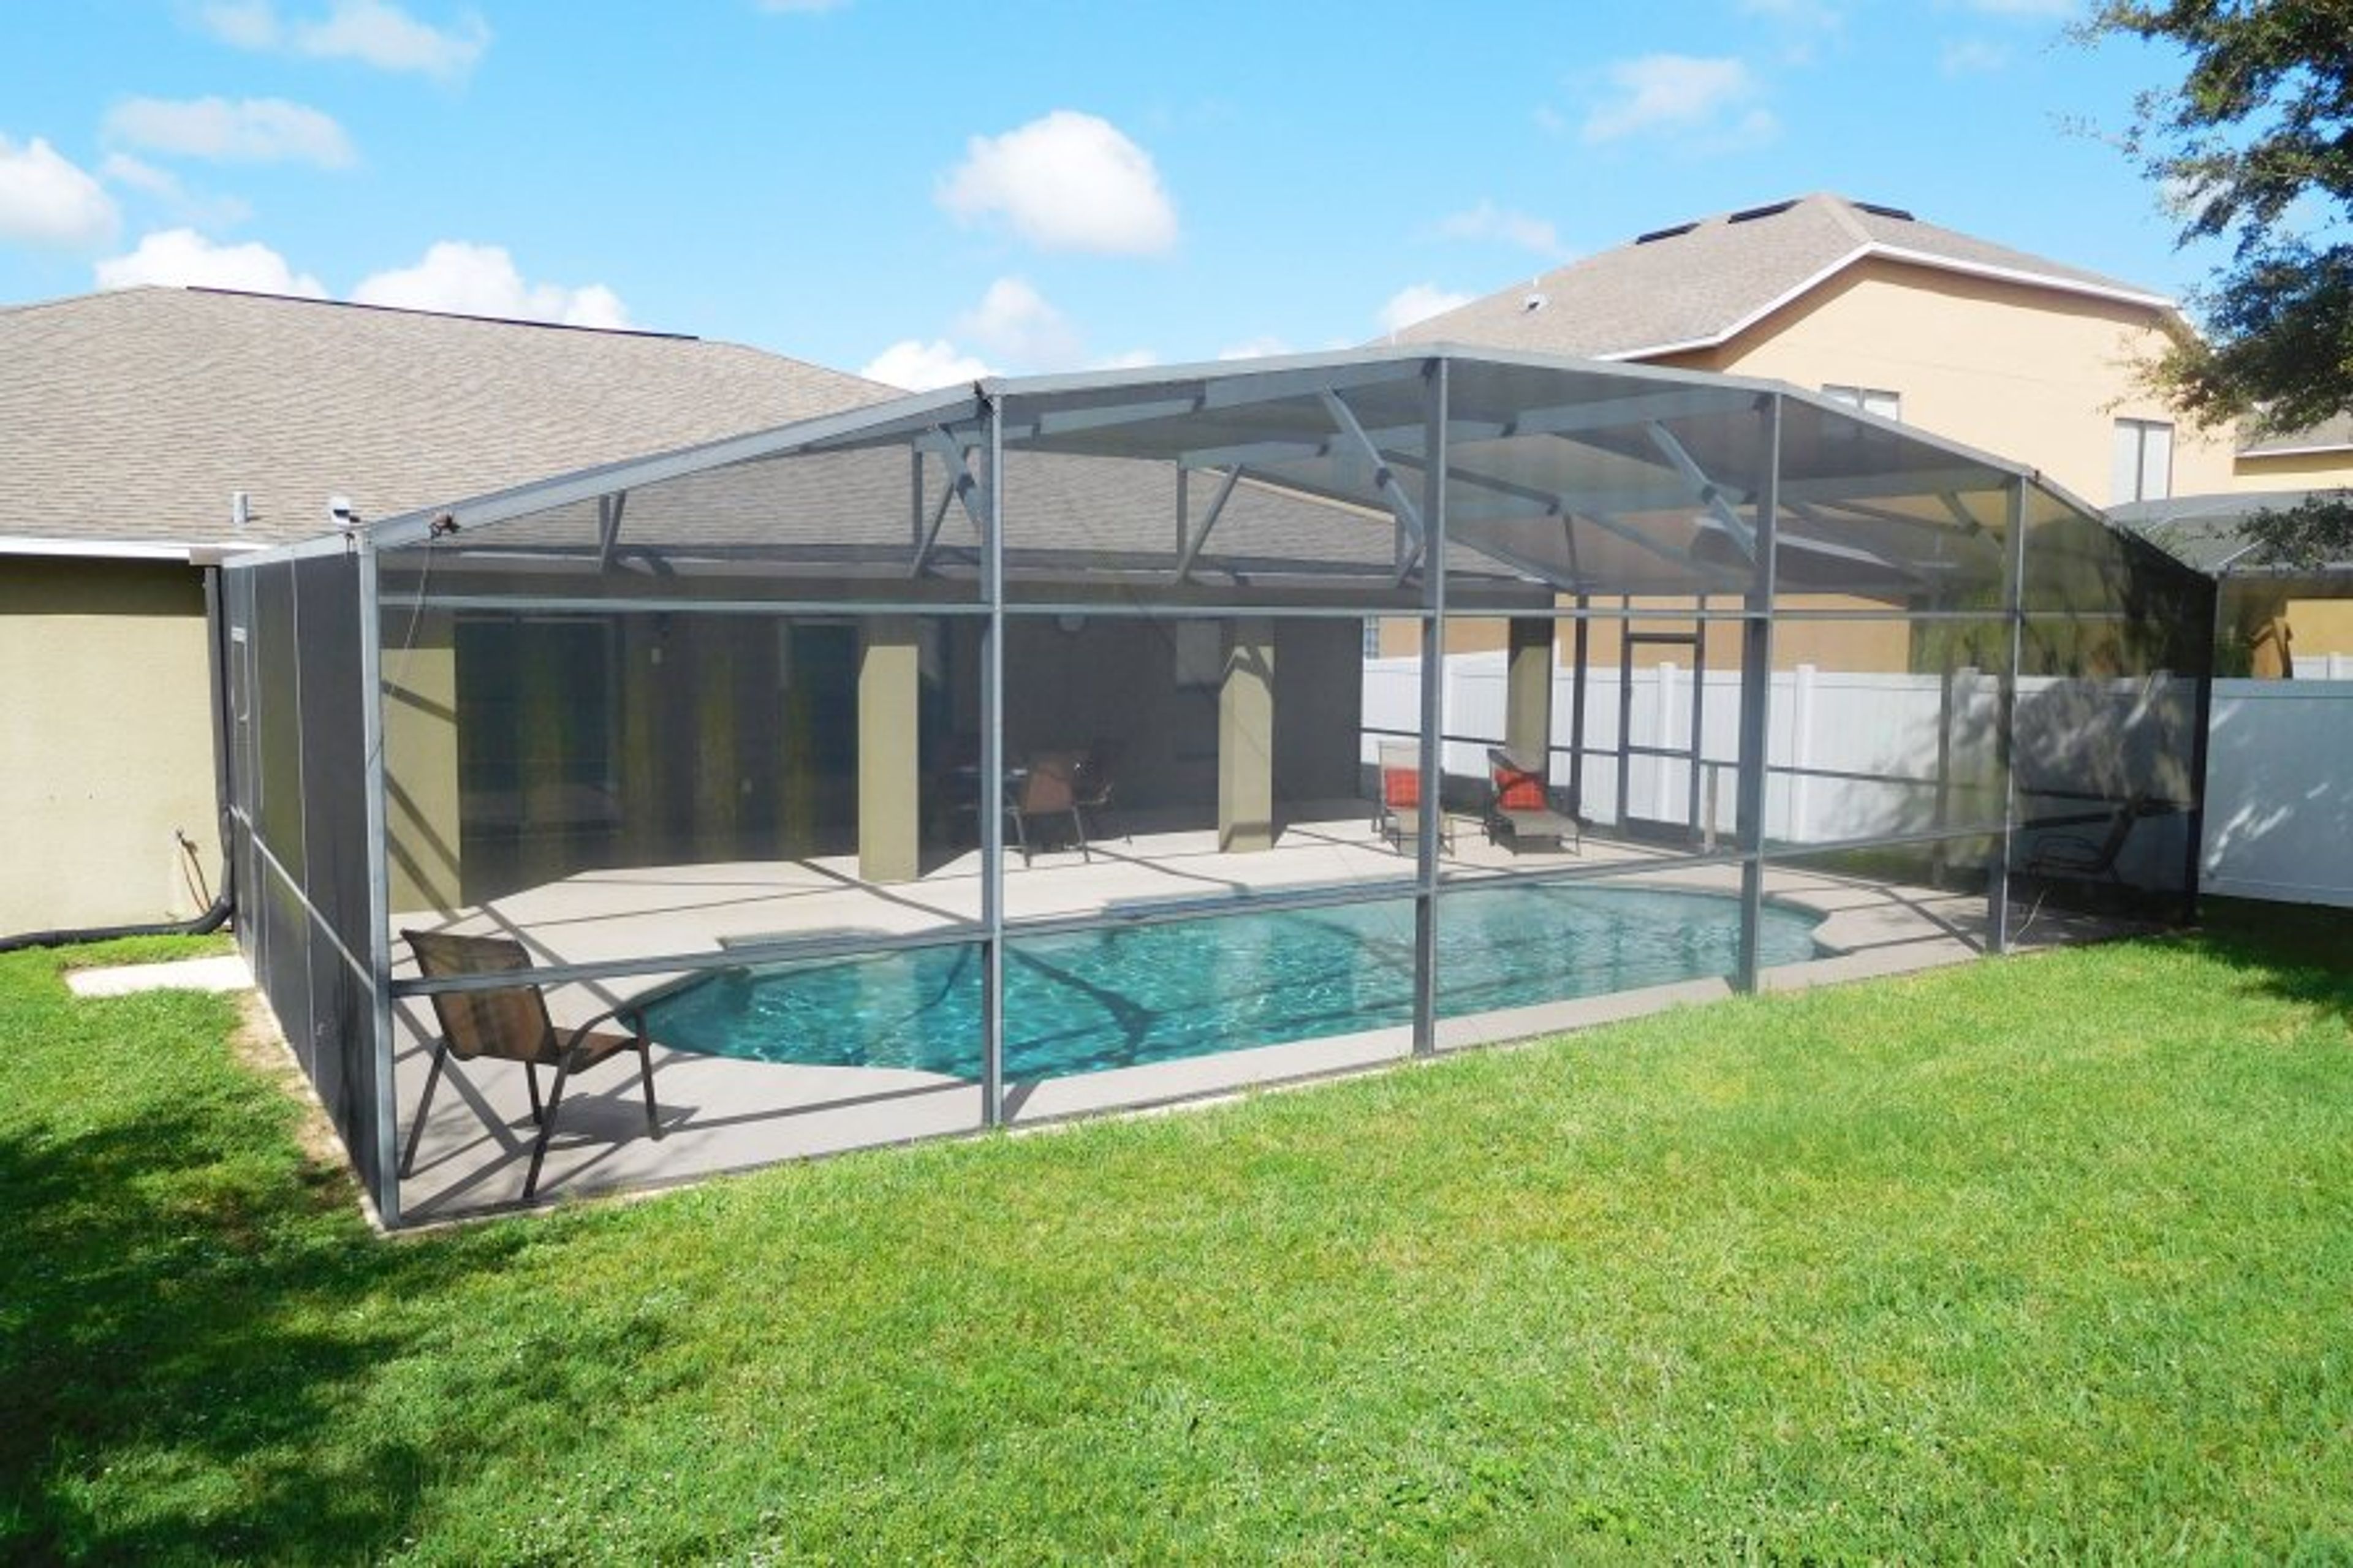 Huge pool with pool deck, loungers, comfortable seating, pool fence